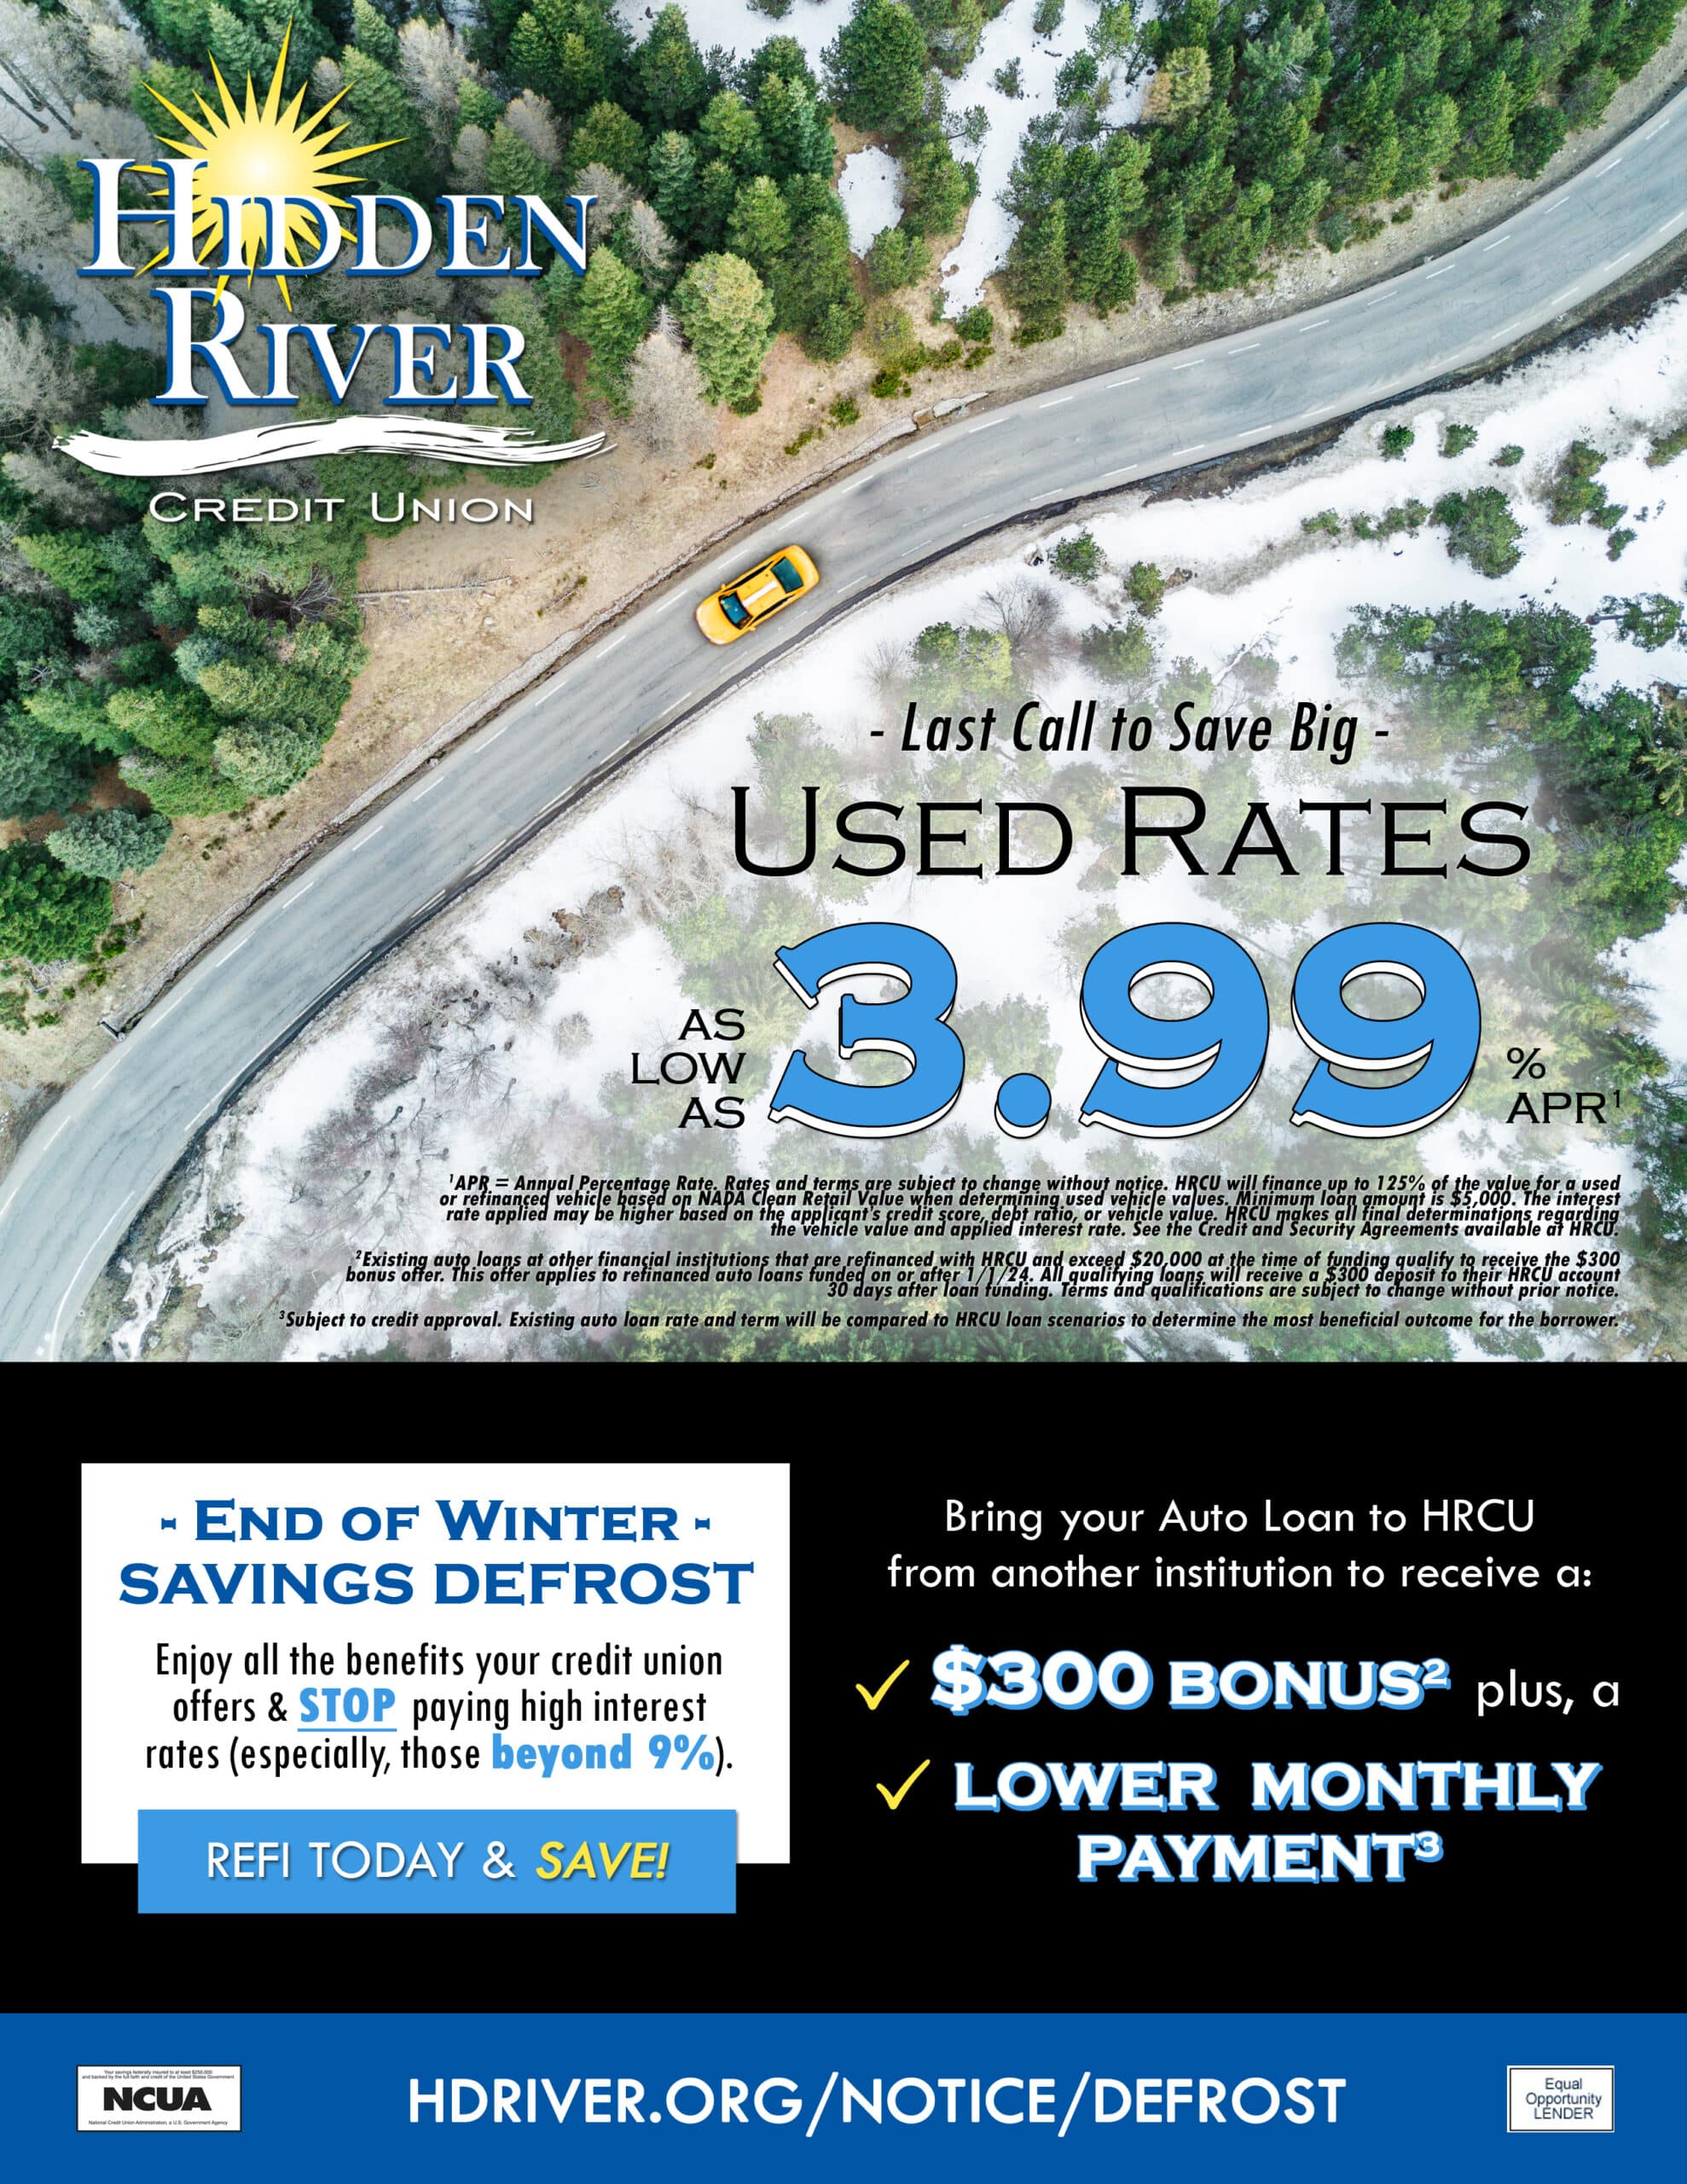 Zoomed out view of yellow car driving on paved road through a defrosting forest. Includes text, "Last Call to Save Big. Used rates as low as 3.99% APR." Disclosure included below. Also, text "End of Winter - Savings Defrost - Enjoy all the benefits your credit union offers and STOP paying high interest rates, especially those beyond 9%. REFI and SAVE!" "Bring your auto loan to HRCU from another institution to receive a $300 Bonus, plus a Lower Monthly Payment." Underneath is the disclosure, website, phone number, and NCUA and EOL icons.